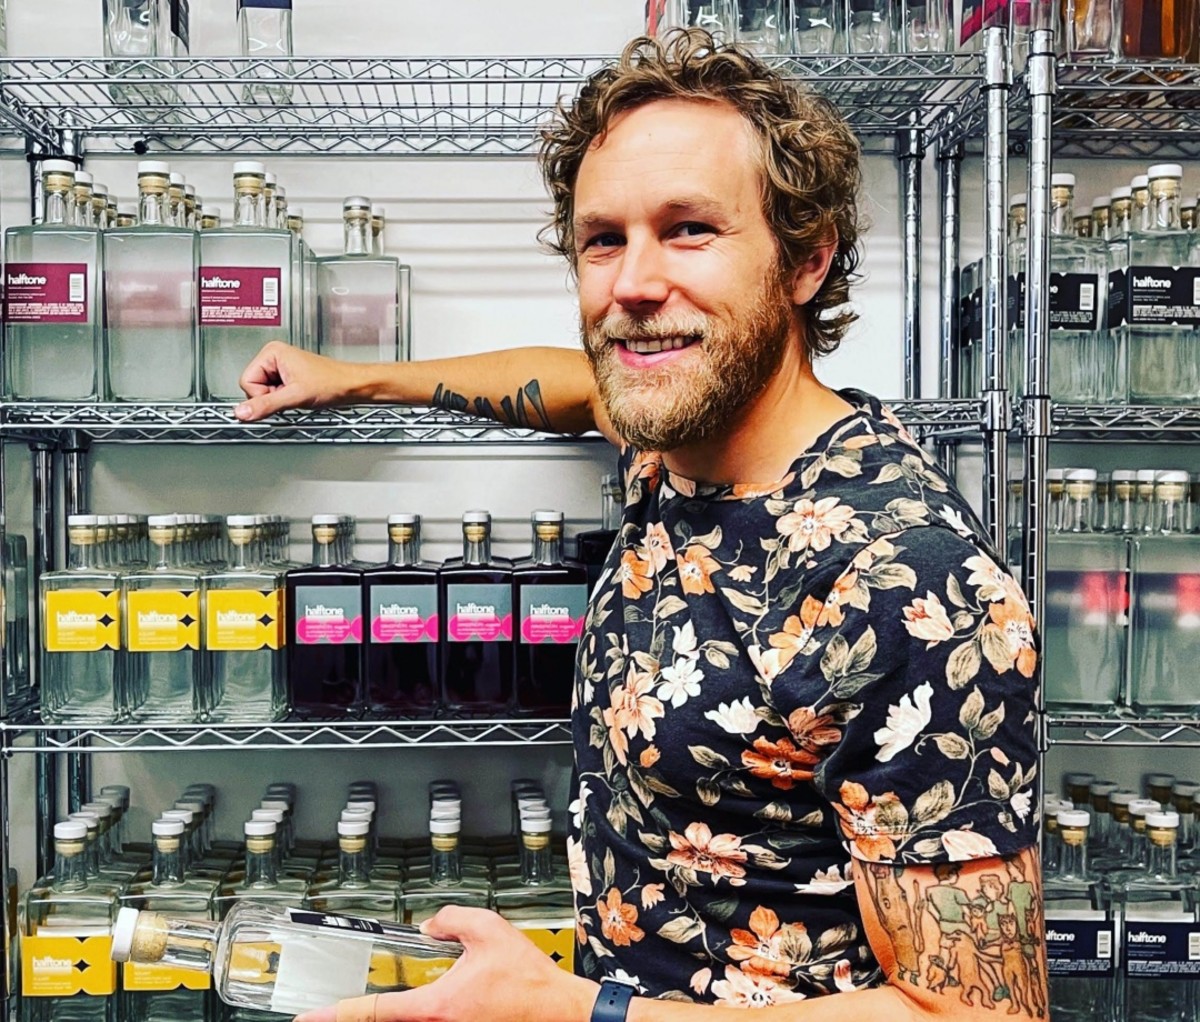 Bearded man smilling while holding a clear bottle of aquavit liquor in front of shelving holding more liquor bottles.